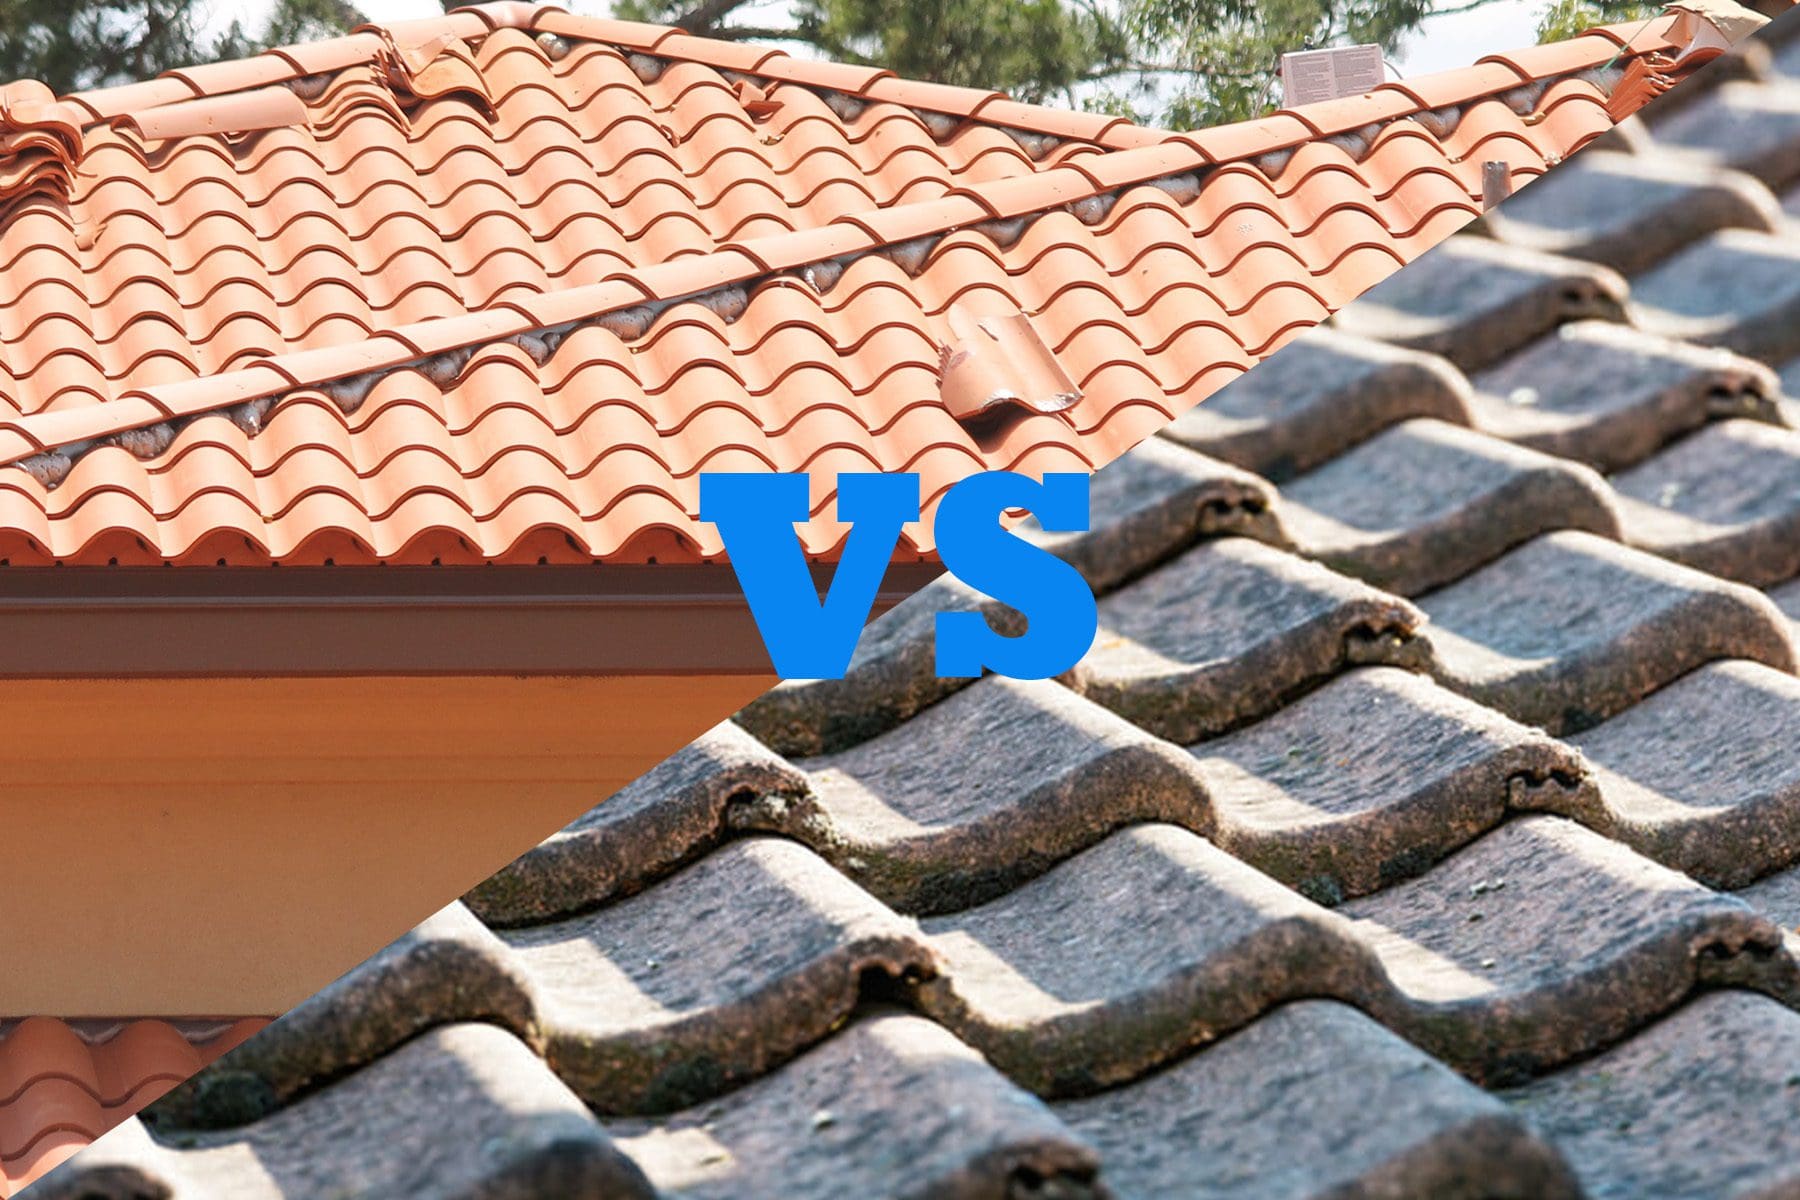 How To Tell The Difference Between Clay And Concrete Roof Tiles